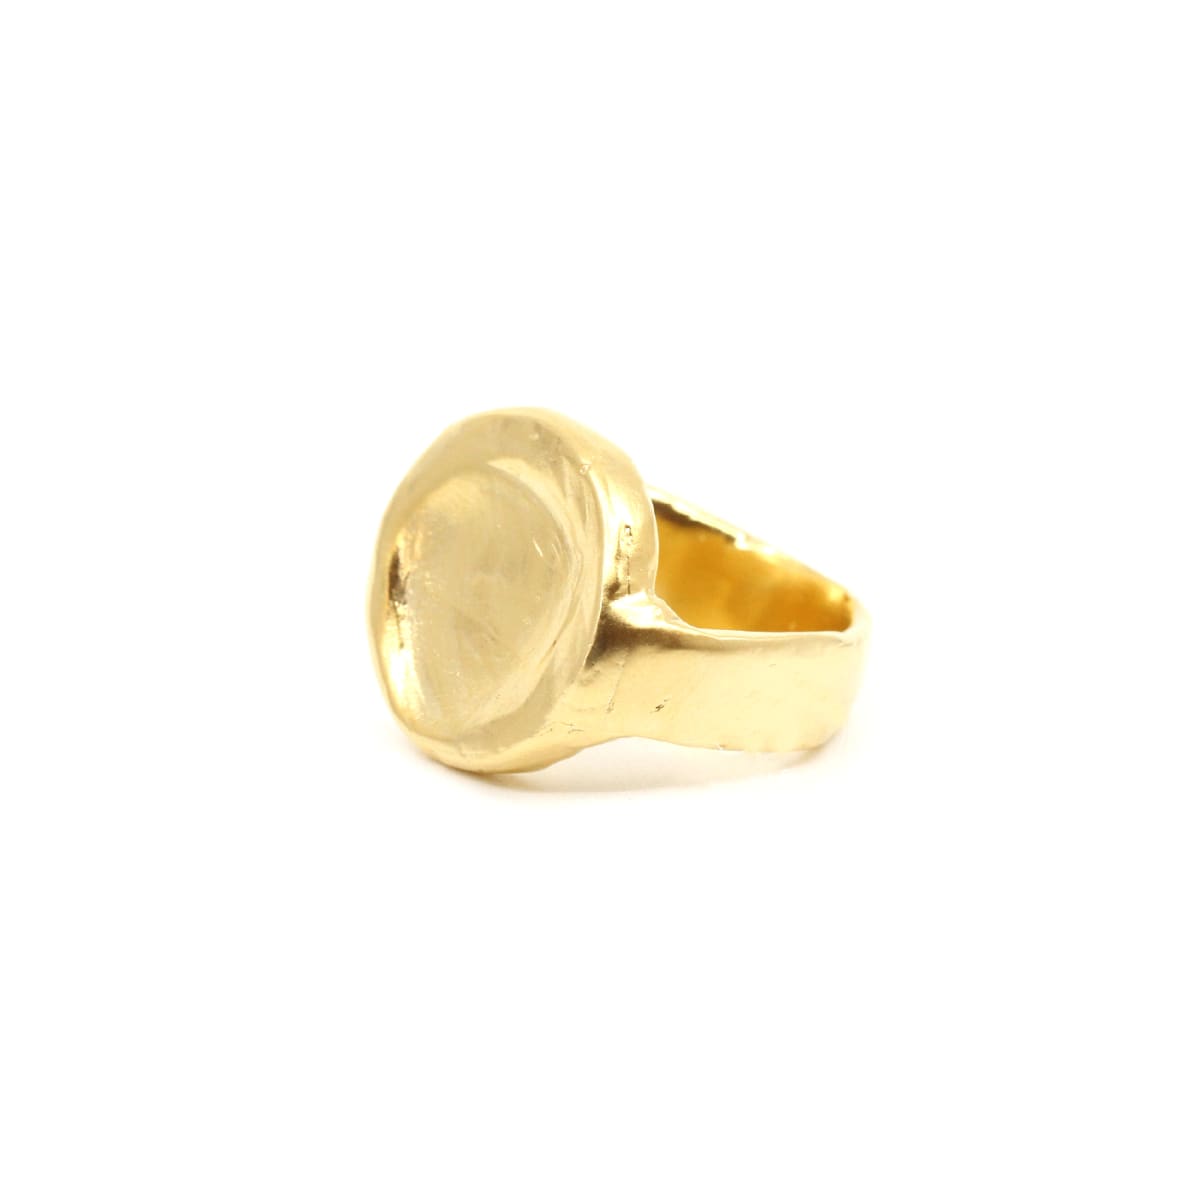 Statement Ring in 10k Gold by Jenn Goff  Image: copyright Gallery Lulo